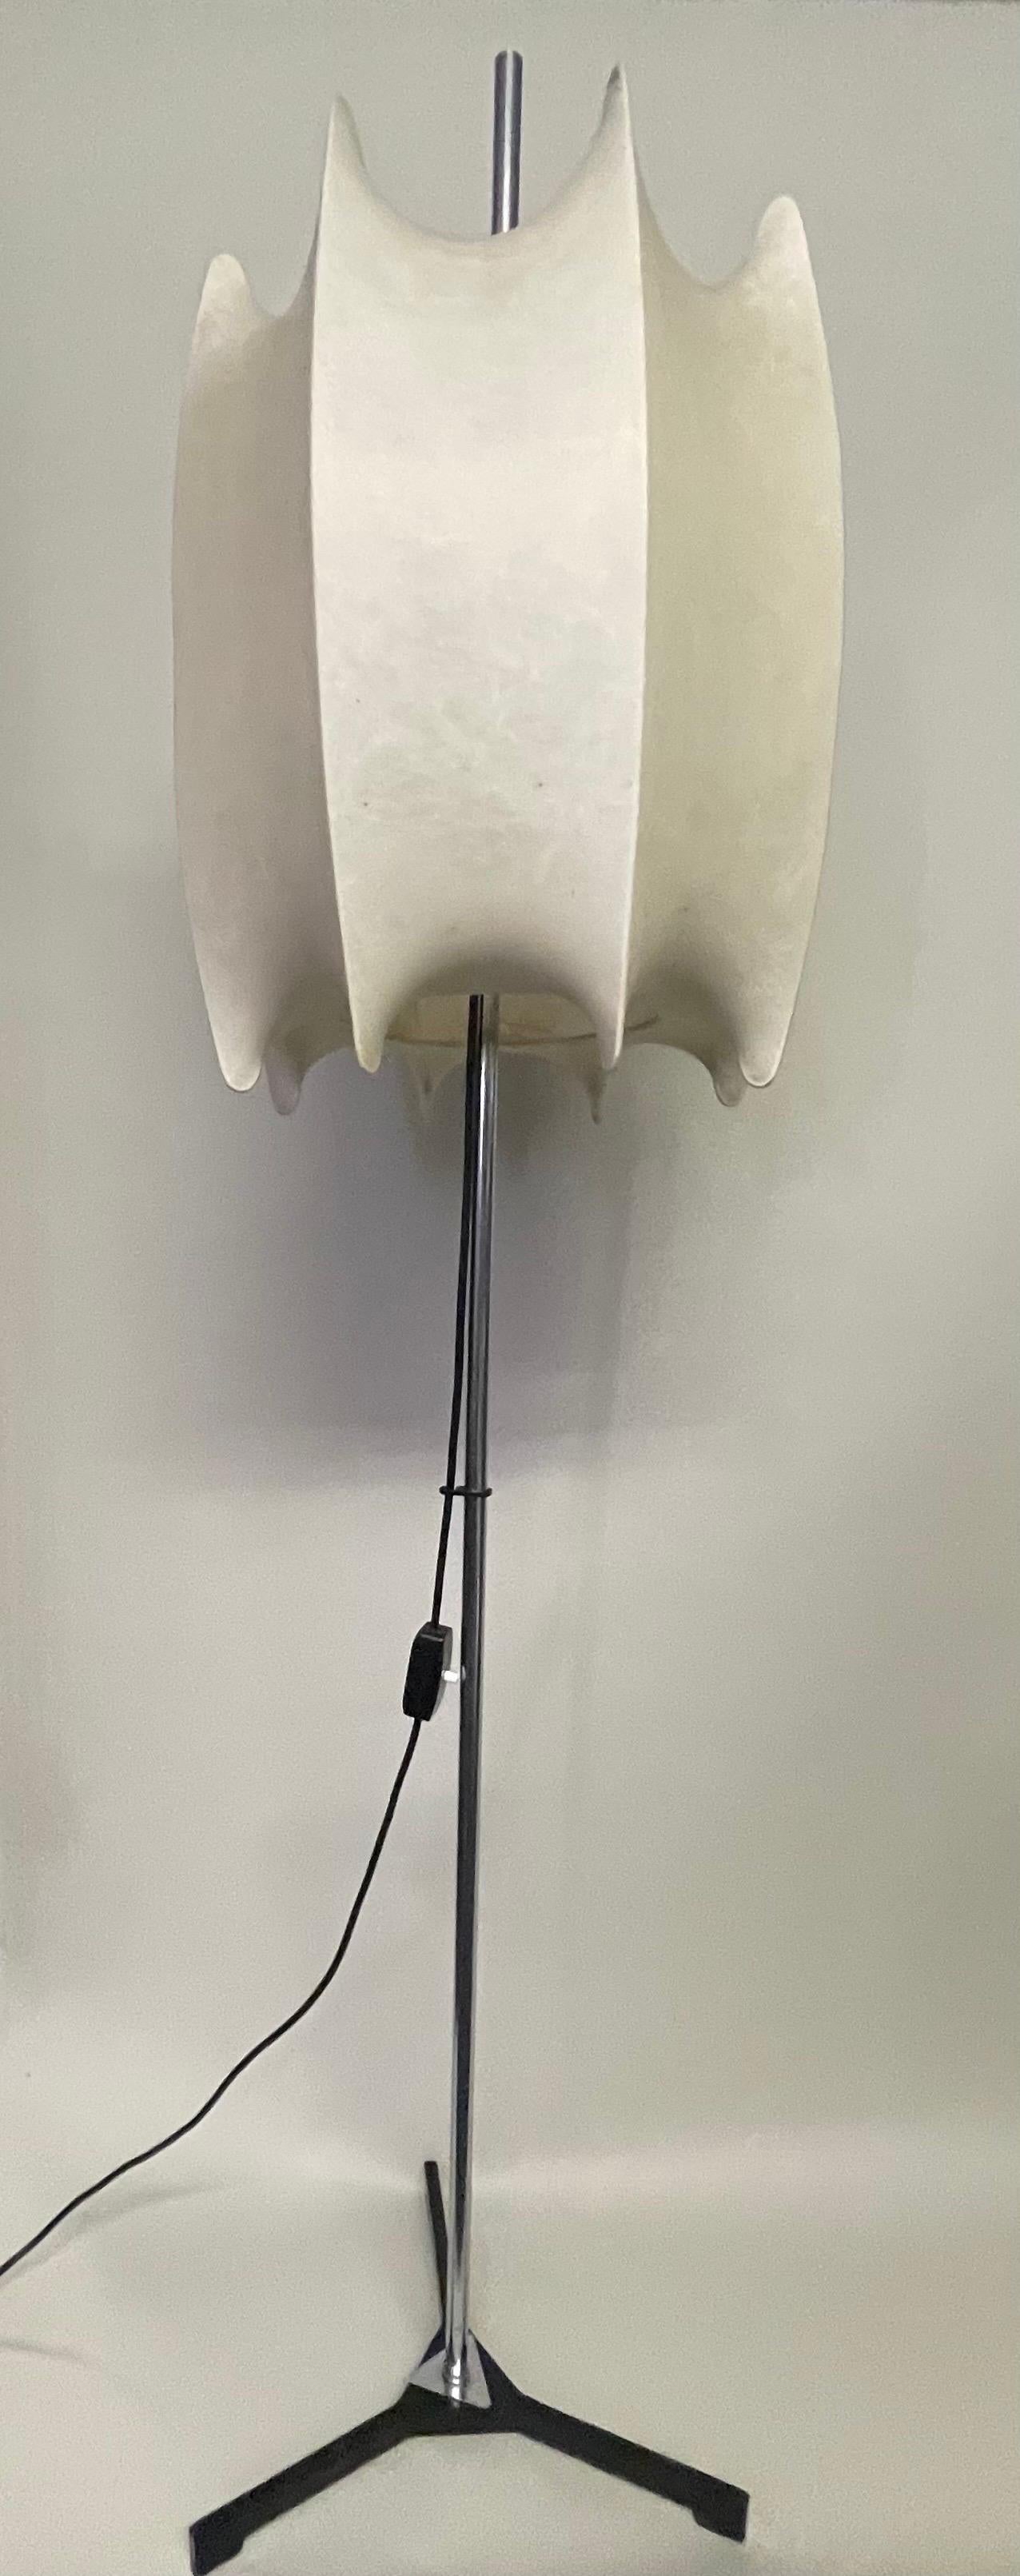 Midcentury Cocoon Floor Lamp Attributed to Goldkant Leuchten, circa 1960s For Sale 3